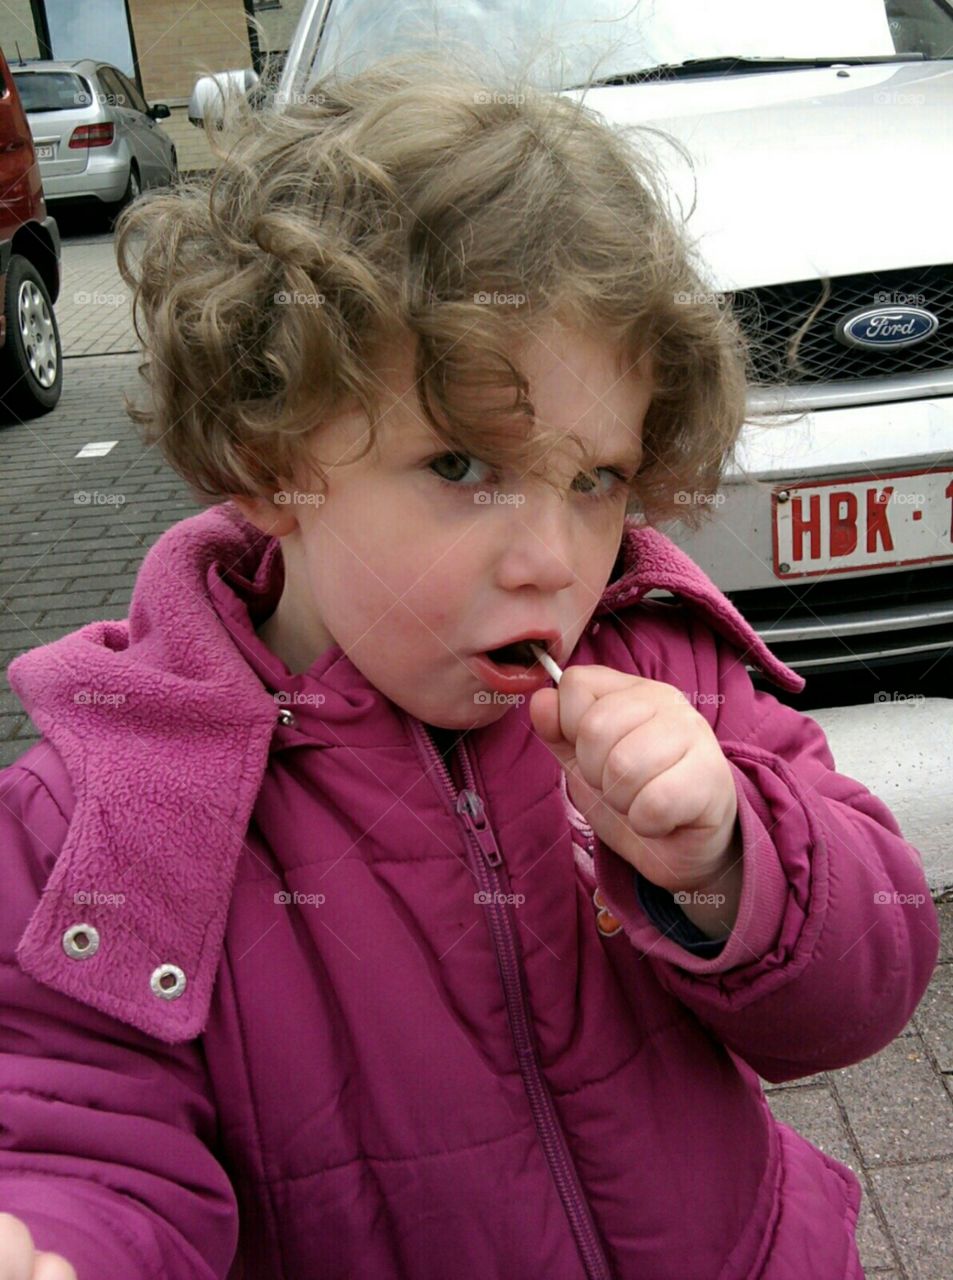 My cute daughter with a lollipop